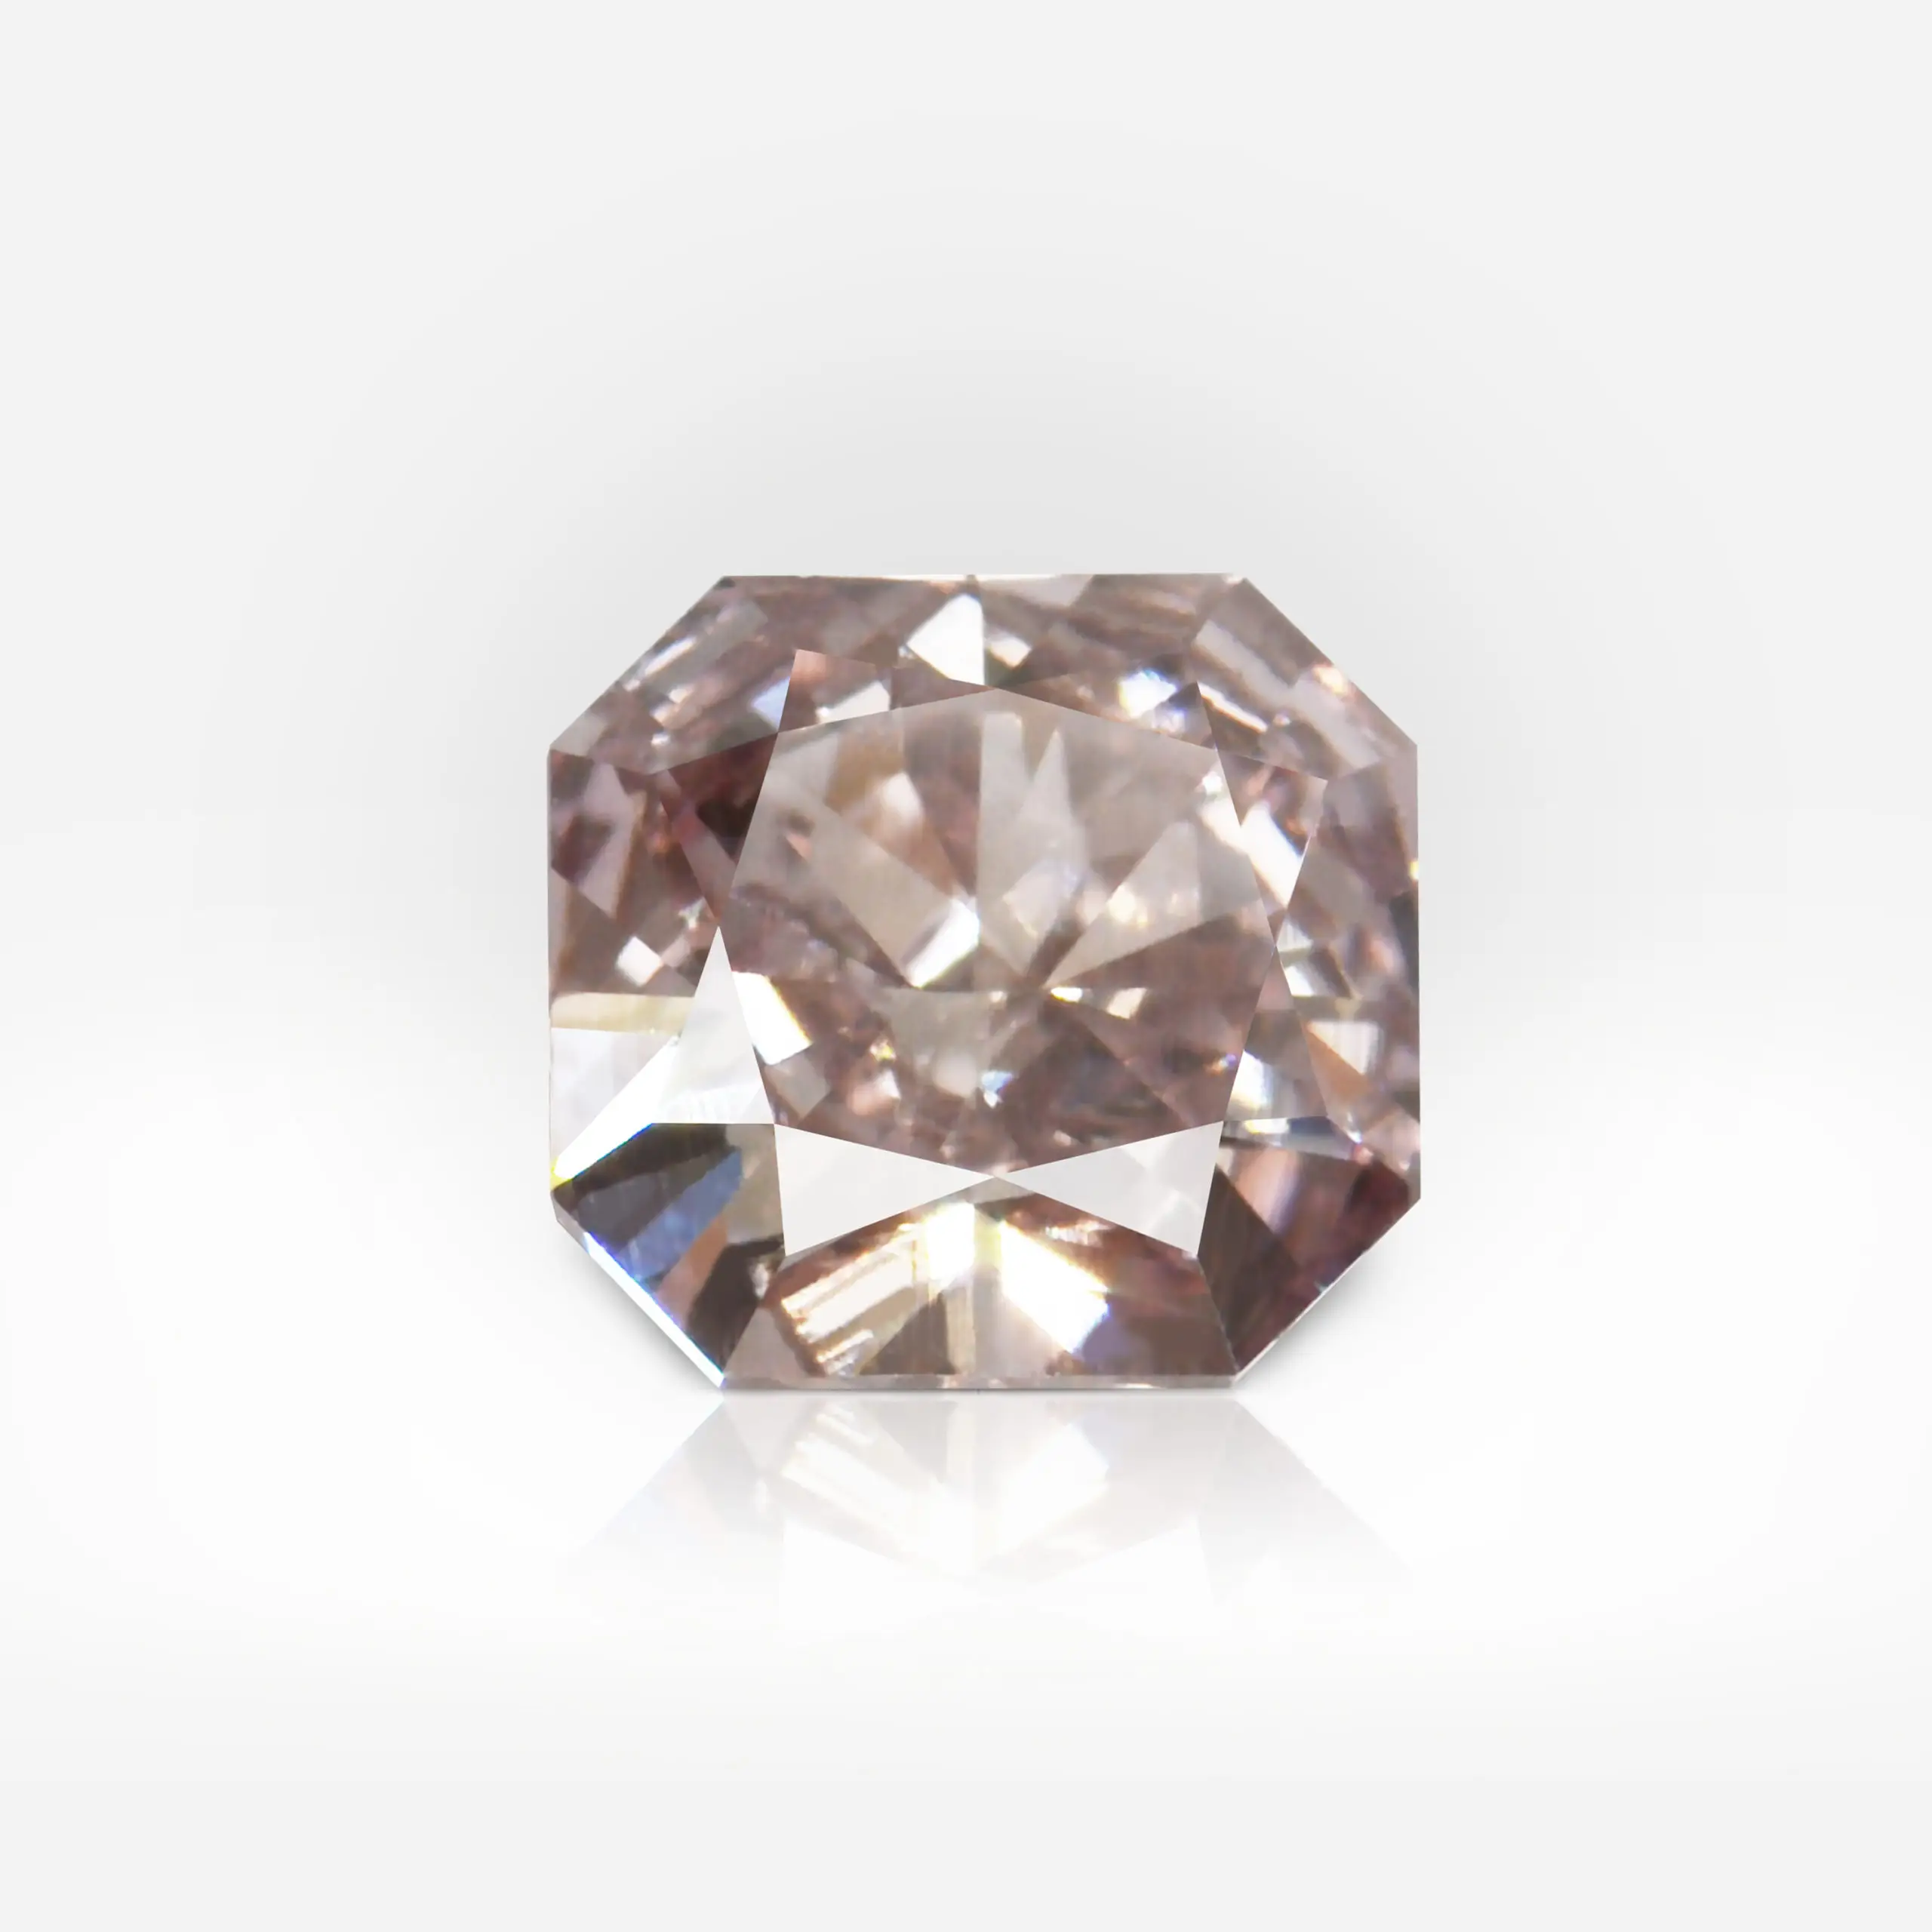 0.94 carat Fancy Pink Brown Radiant Shape Diamond GIA - picture 1